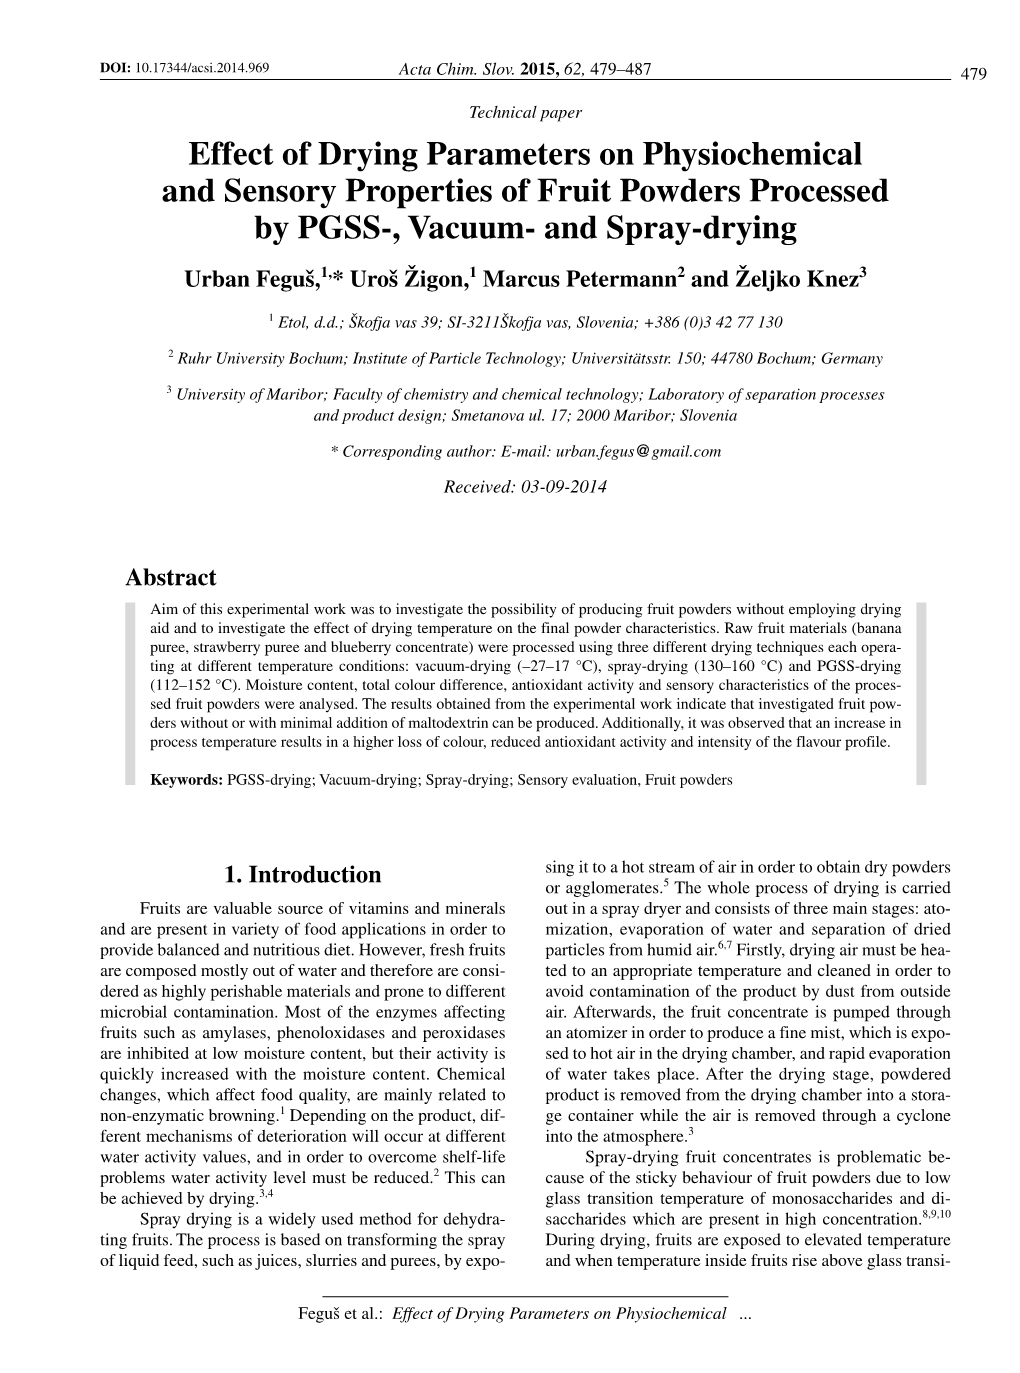 Effect of Drying Parameters on Physiochemical and Sensory Properties of Fruit Powders Processed by PGSS-, Vacuum- and Spray-Dryi